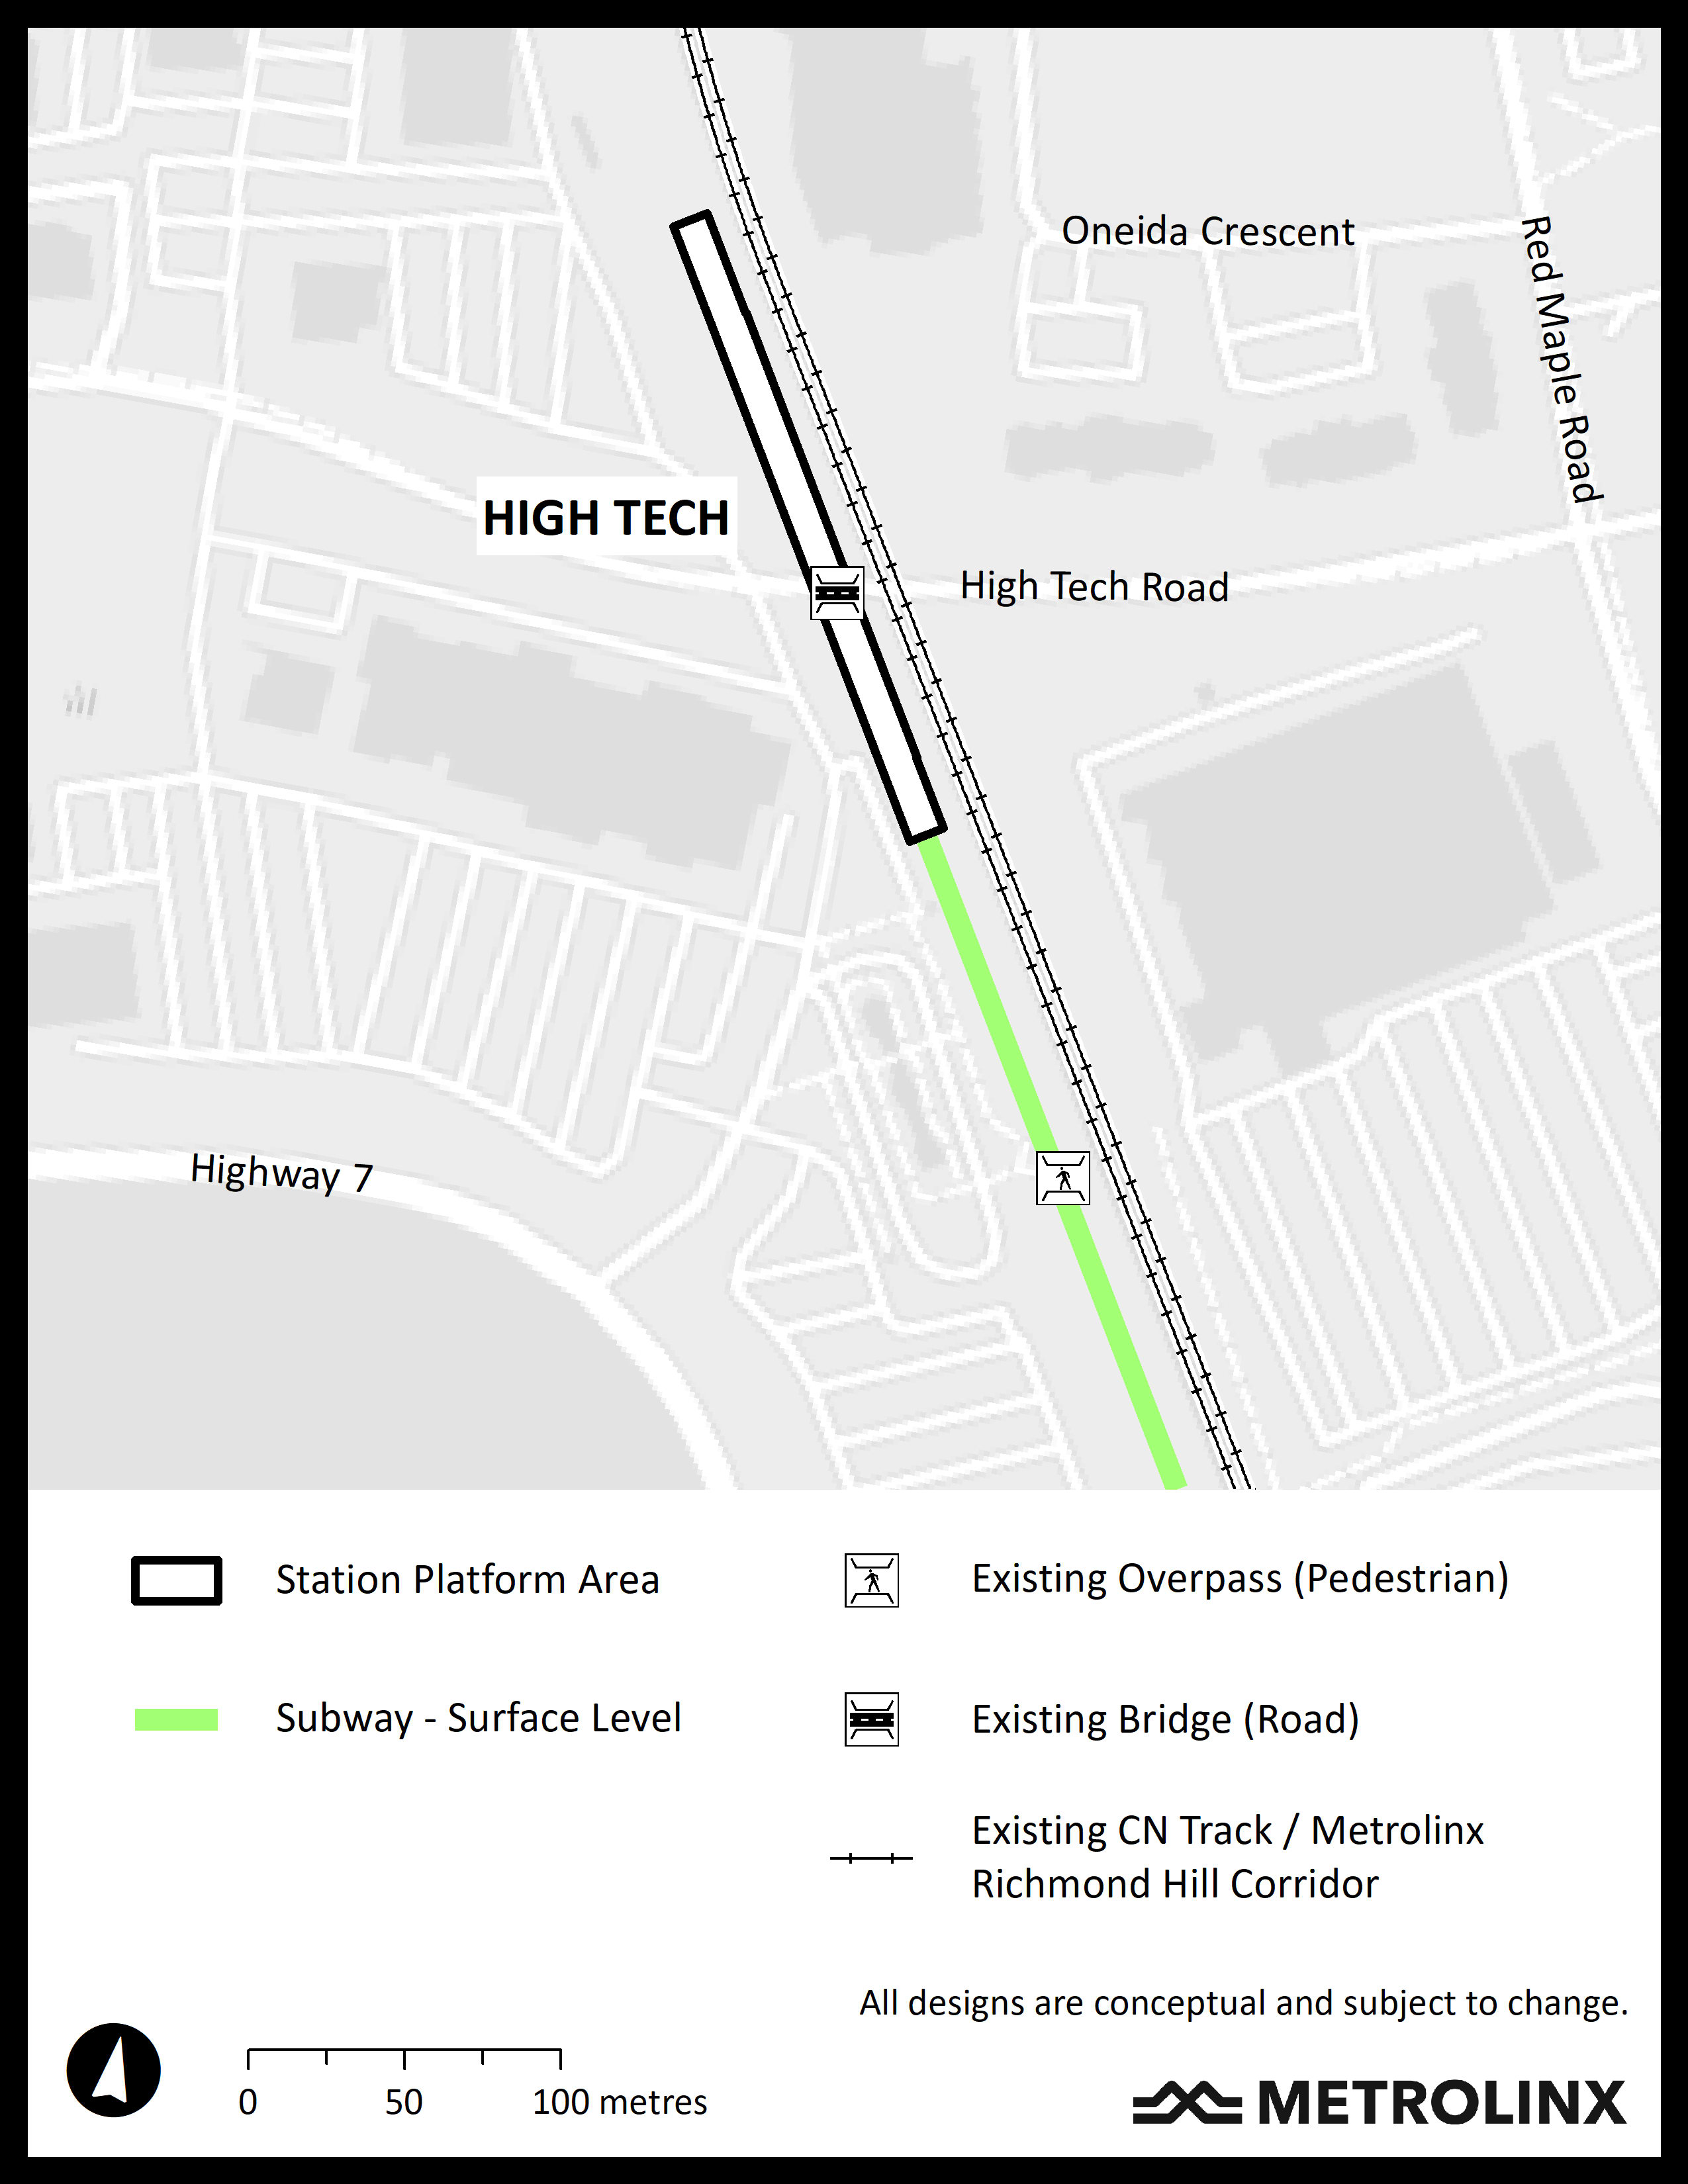 Image is a map of High Tech Road area.